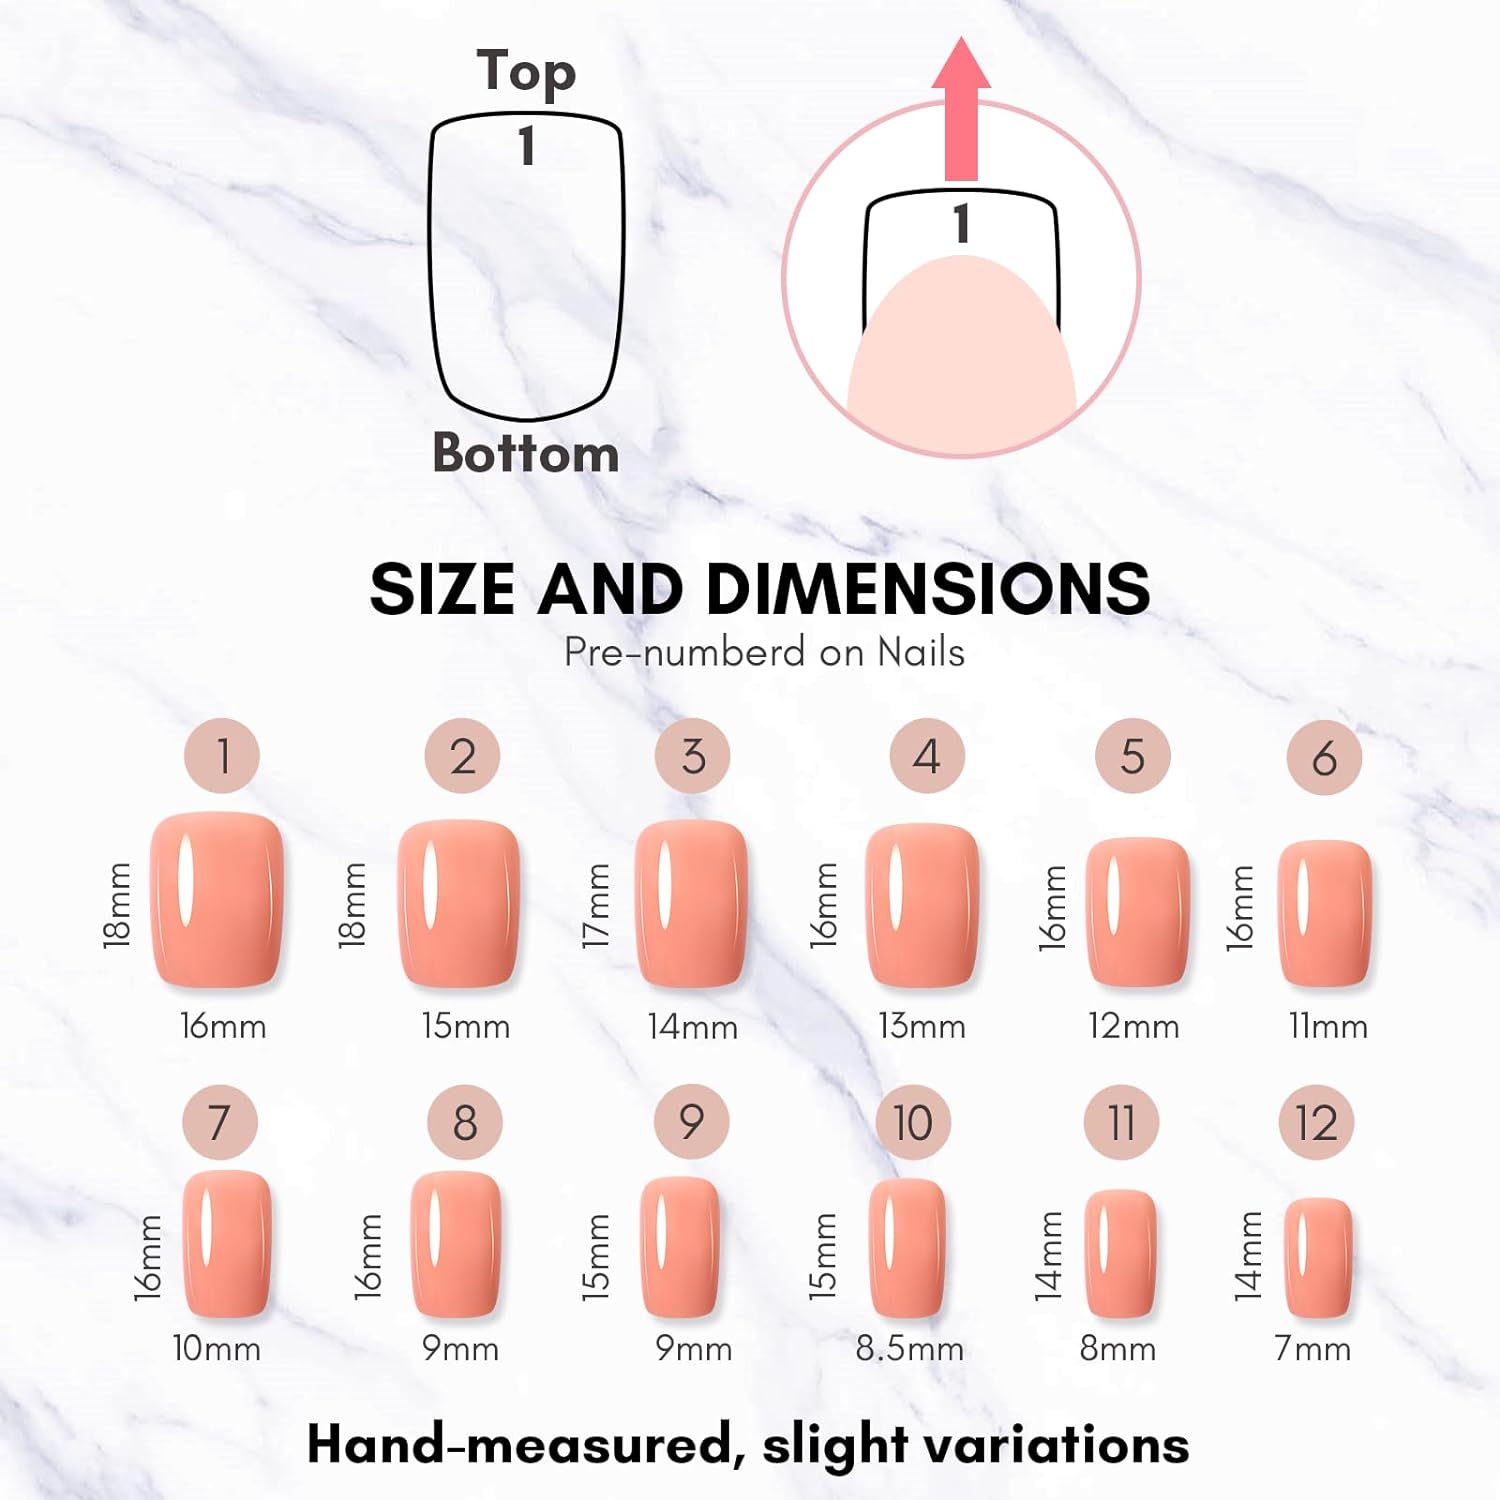 Instant Press On Nails Kit - 12 Sizes 24 Pcs in All Shapes